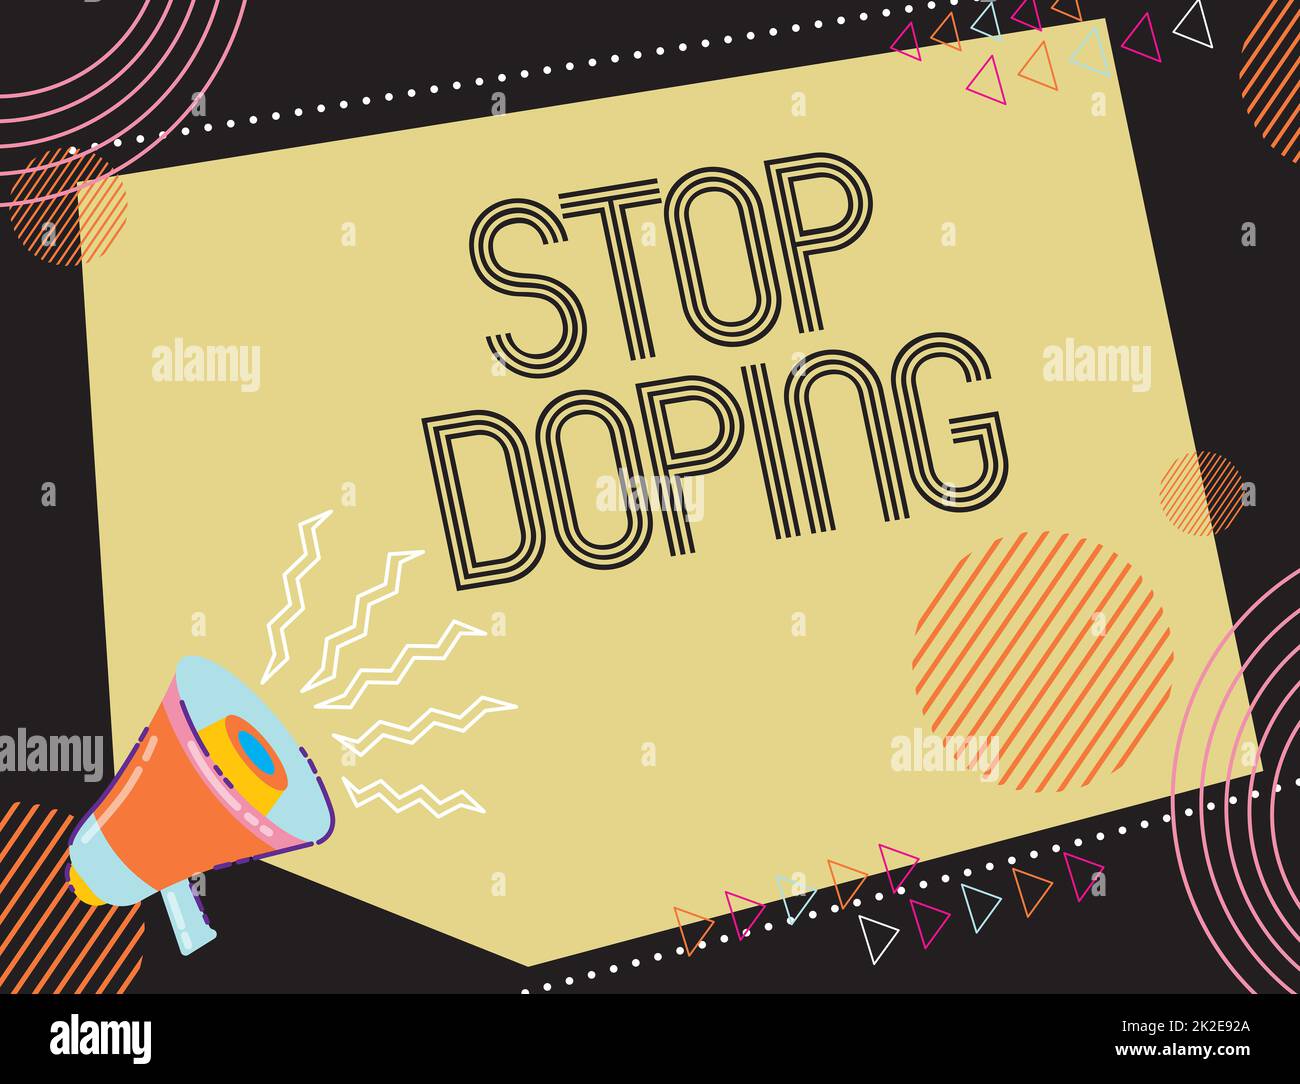 Text sign showing Stop Doping. Concept meaning do not use use banned athletic performance enhancing drugs Illustration Of A Loud Megaphone Making New Wonderful Announcement Public Stock Photo